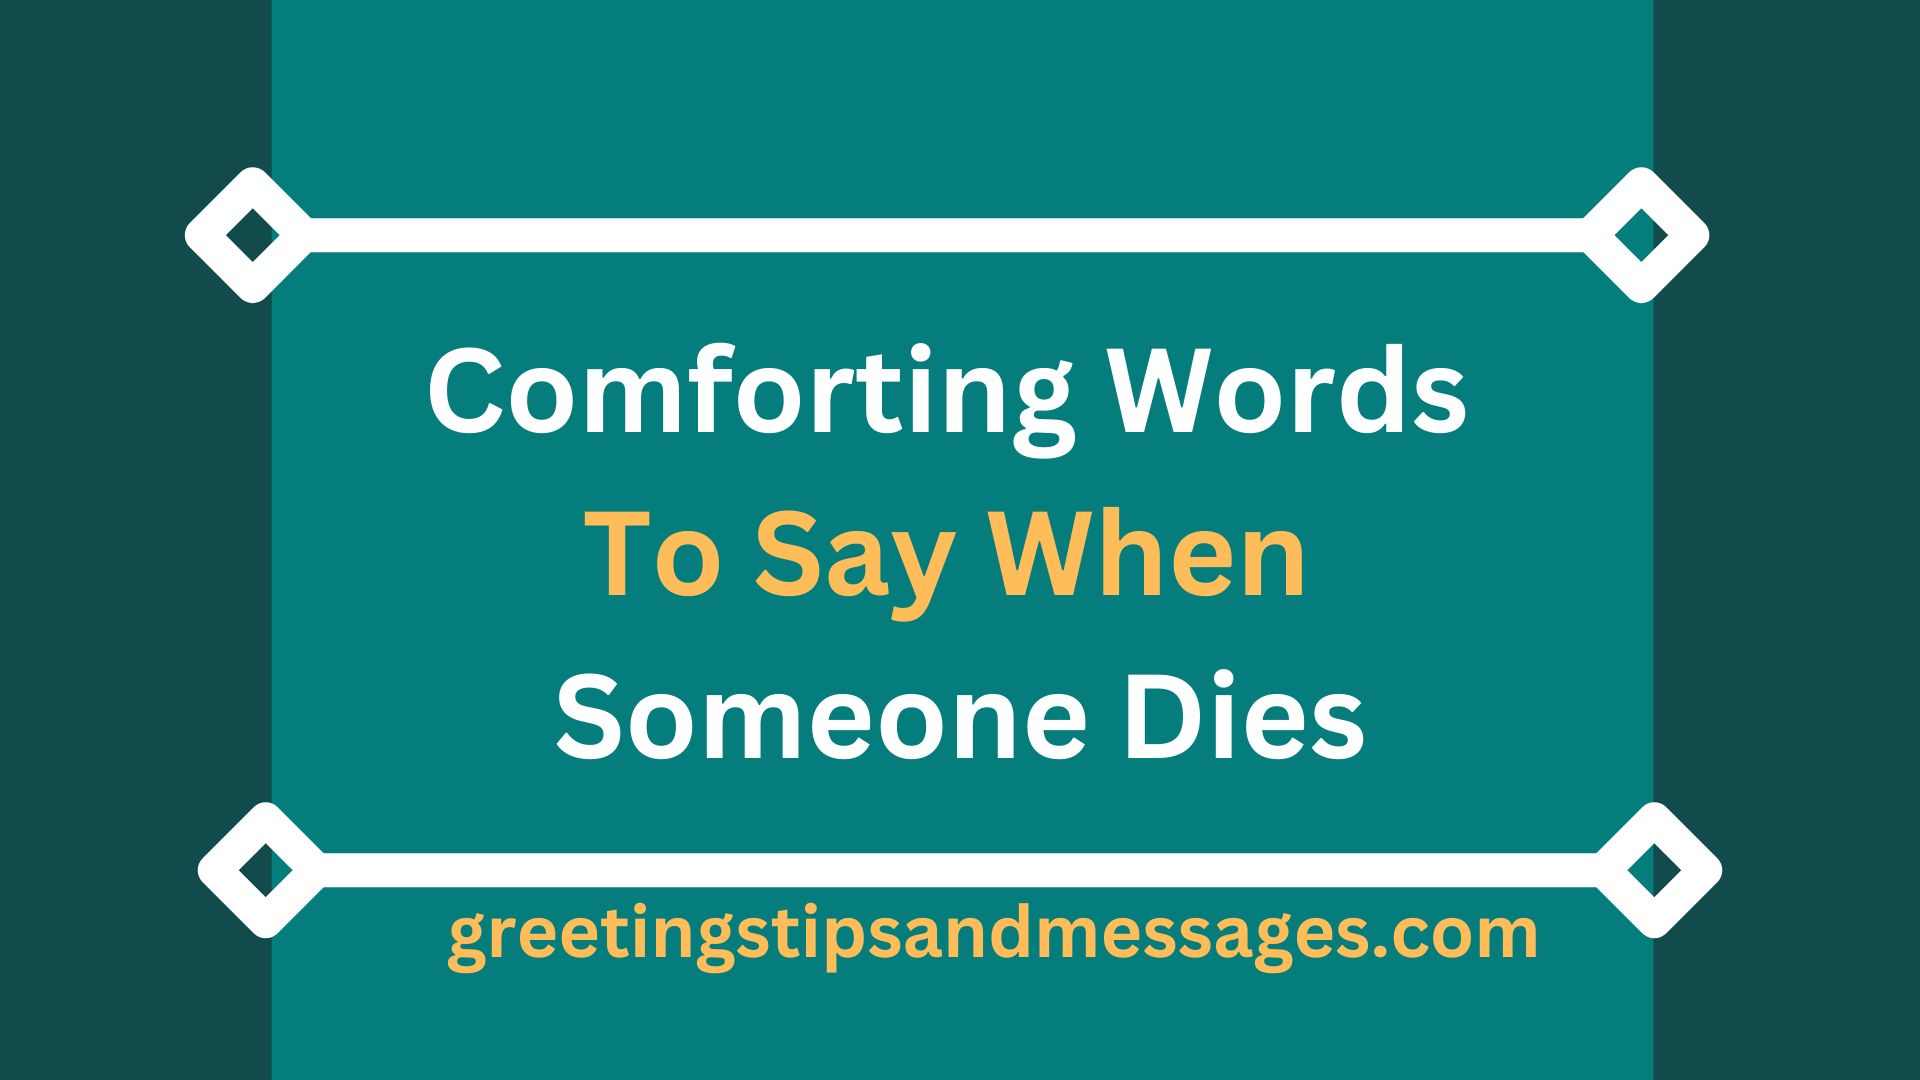 Comforting Words To Say When Someone Dies